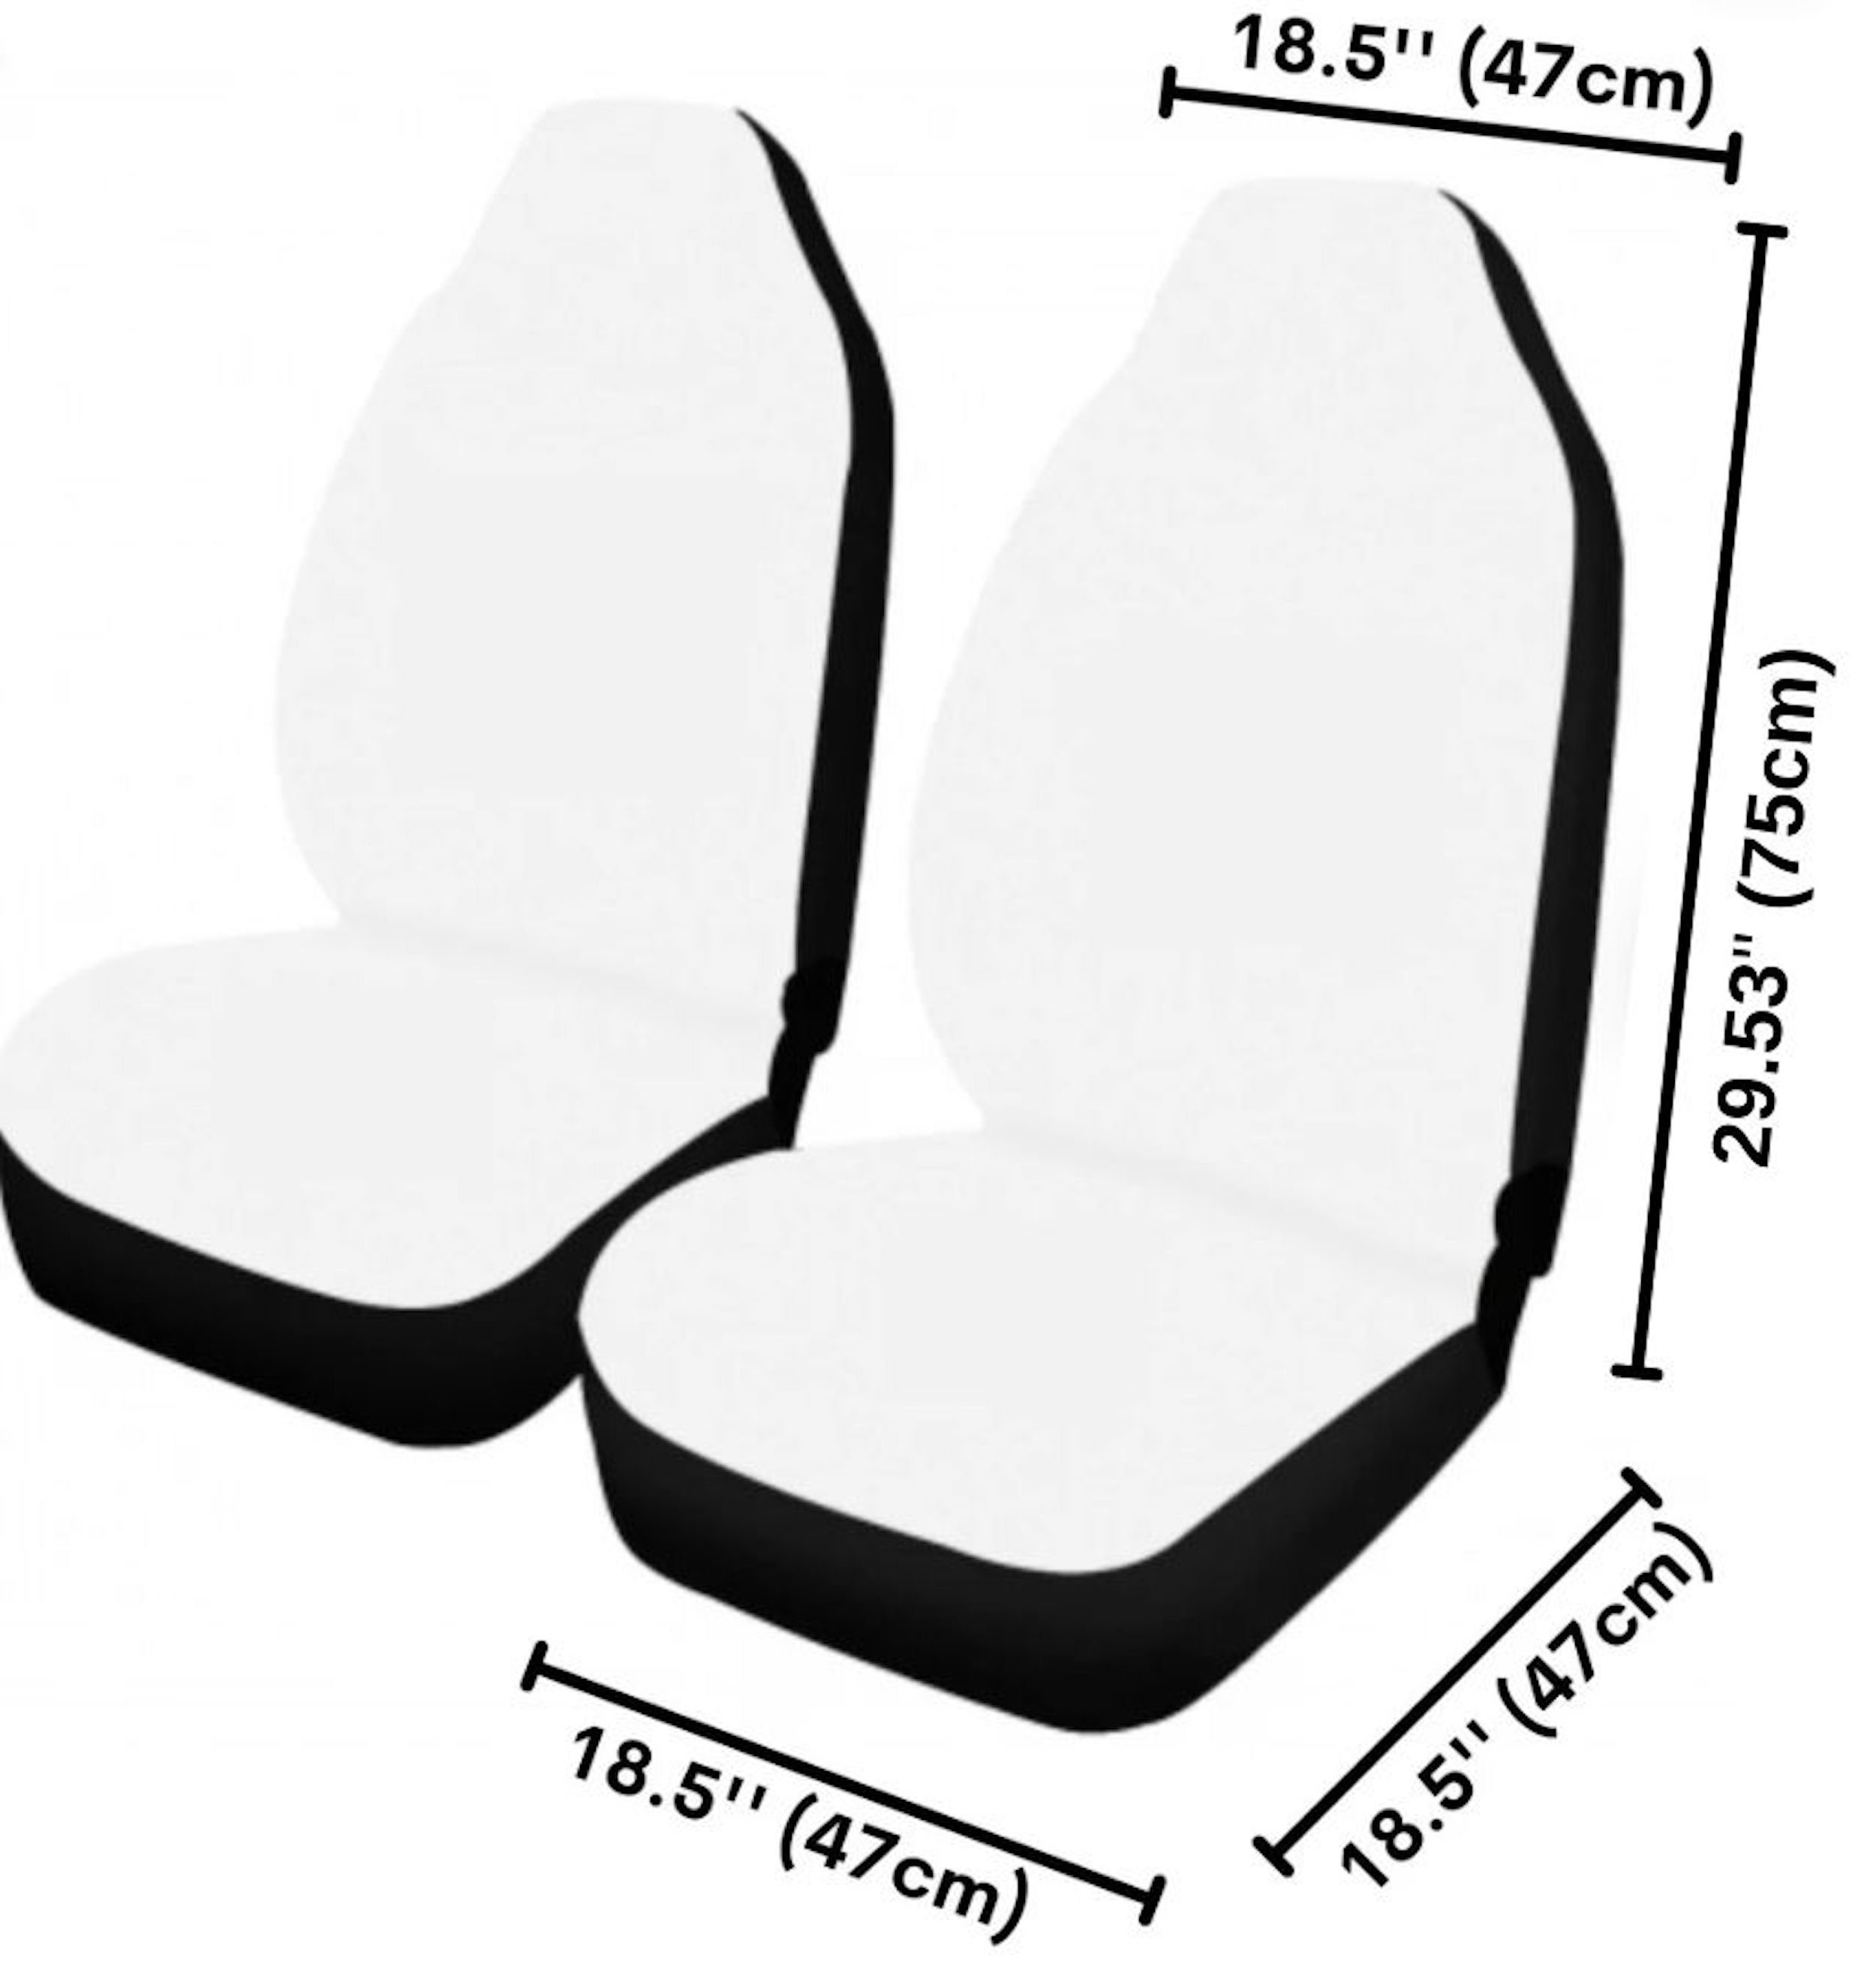 Jesus Take The Wheel Car Seat Covers Set 2 Pc, Car Accessories Seat Co –  Love Mine Gifts